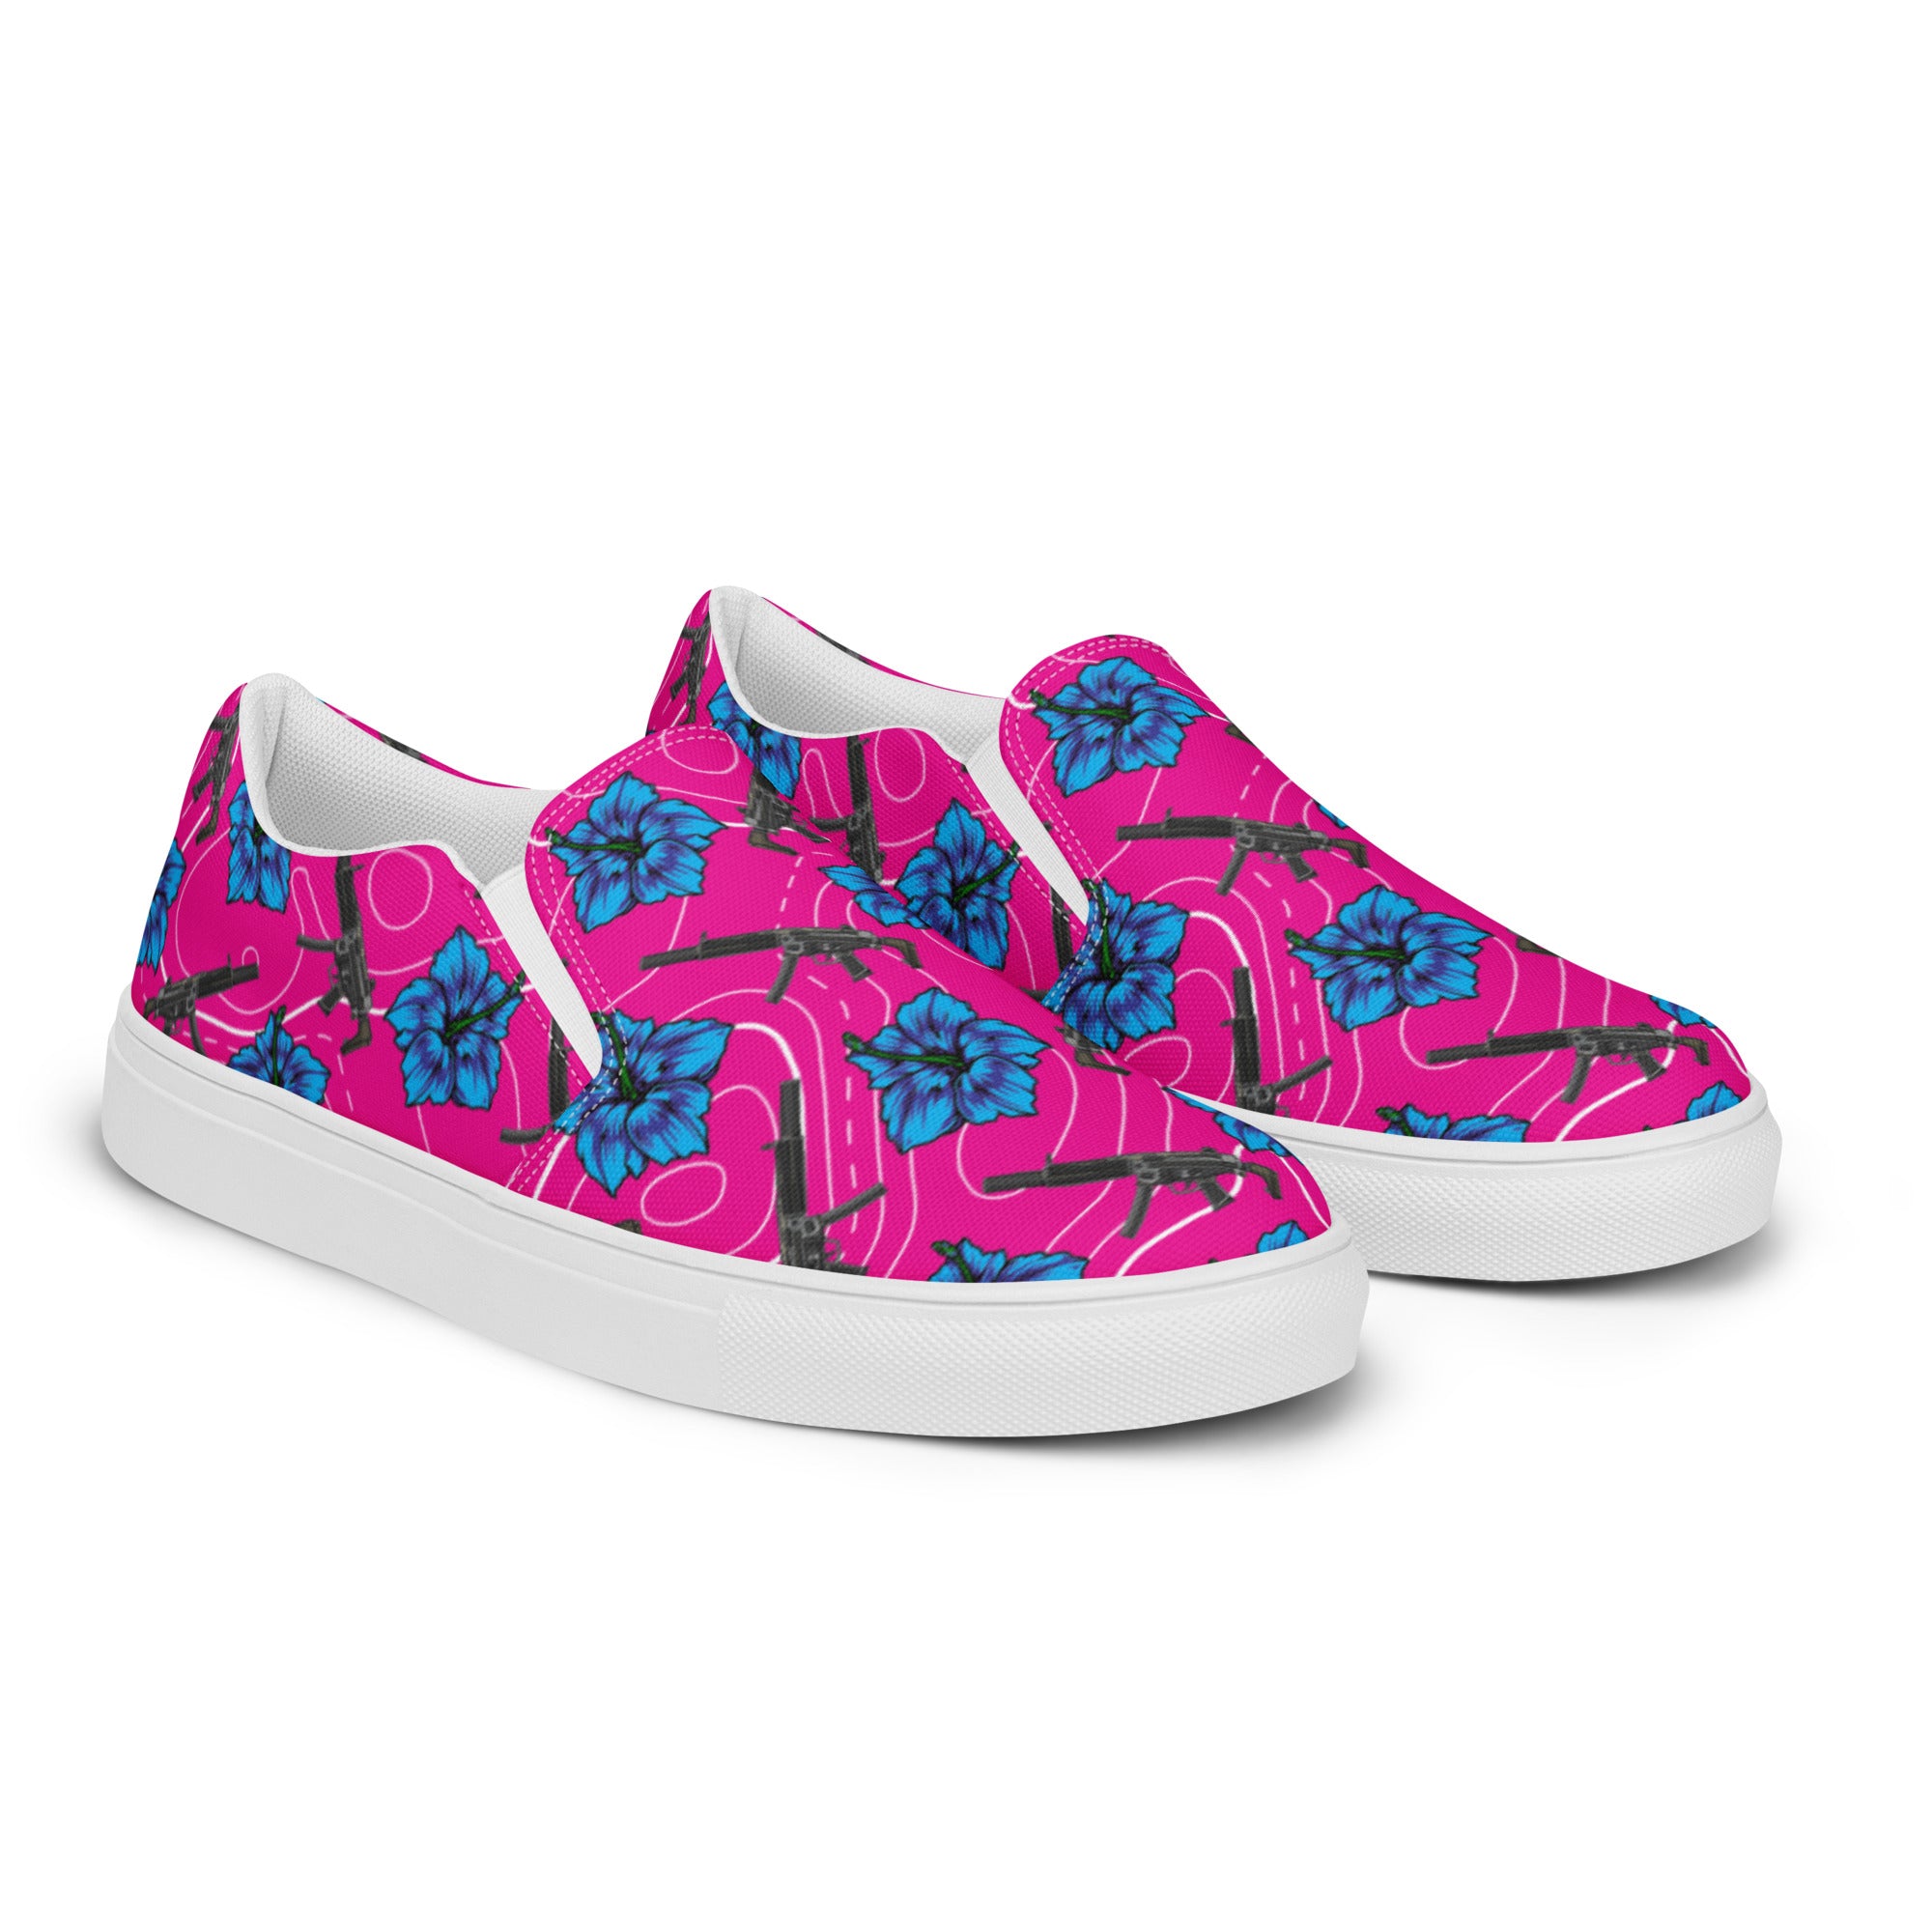 Rad Palm High Capacity Hibiscus Women's Slip On Canvas Shoes